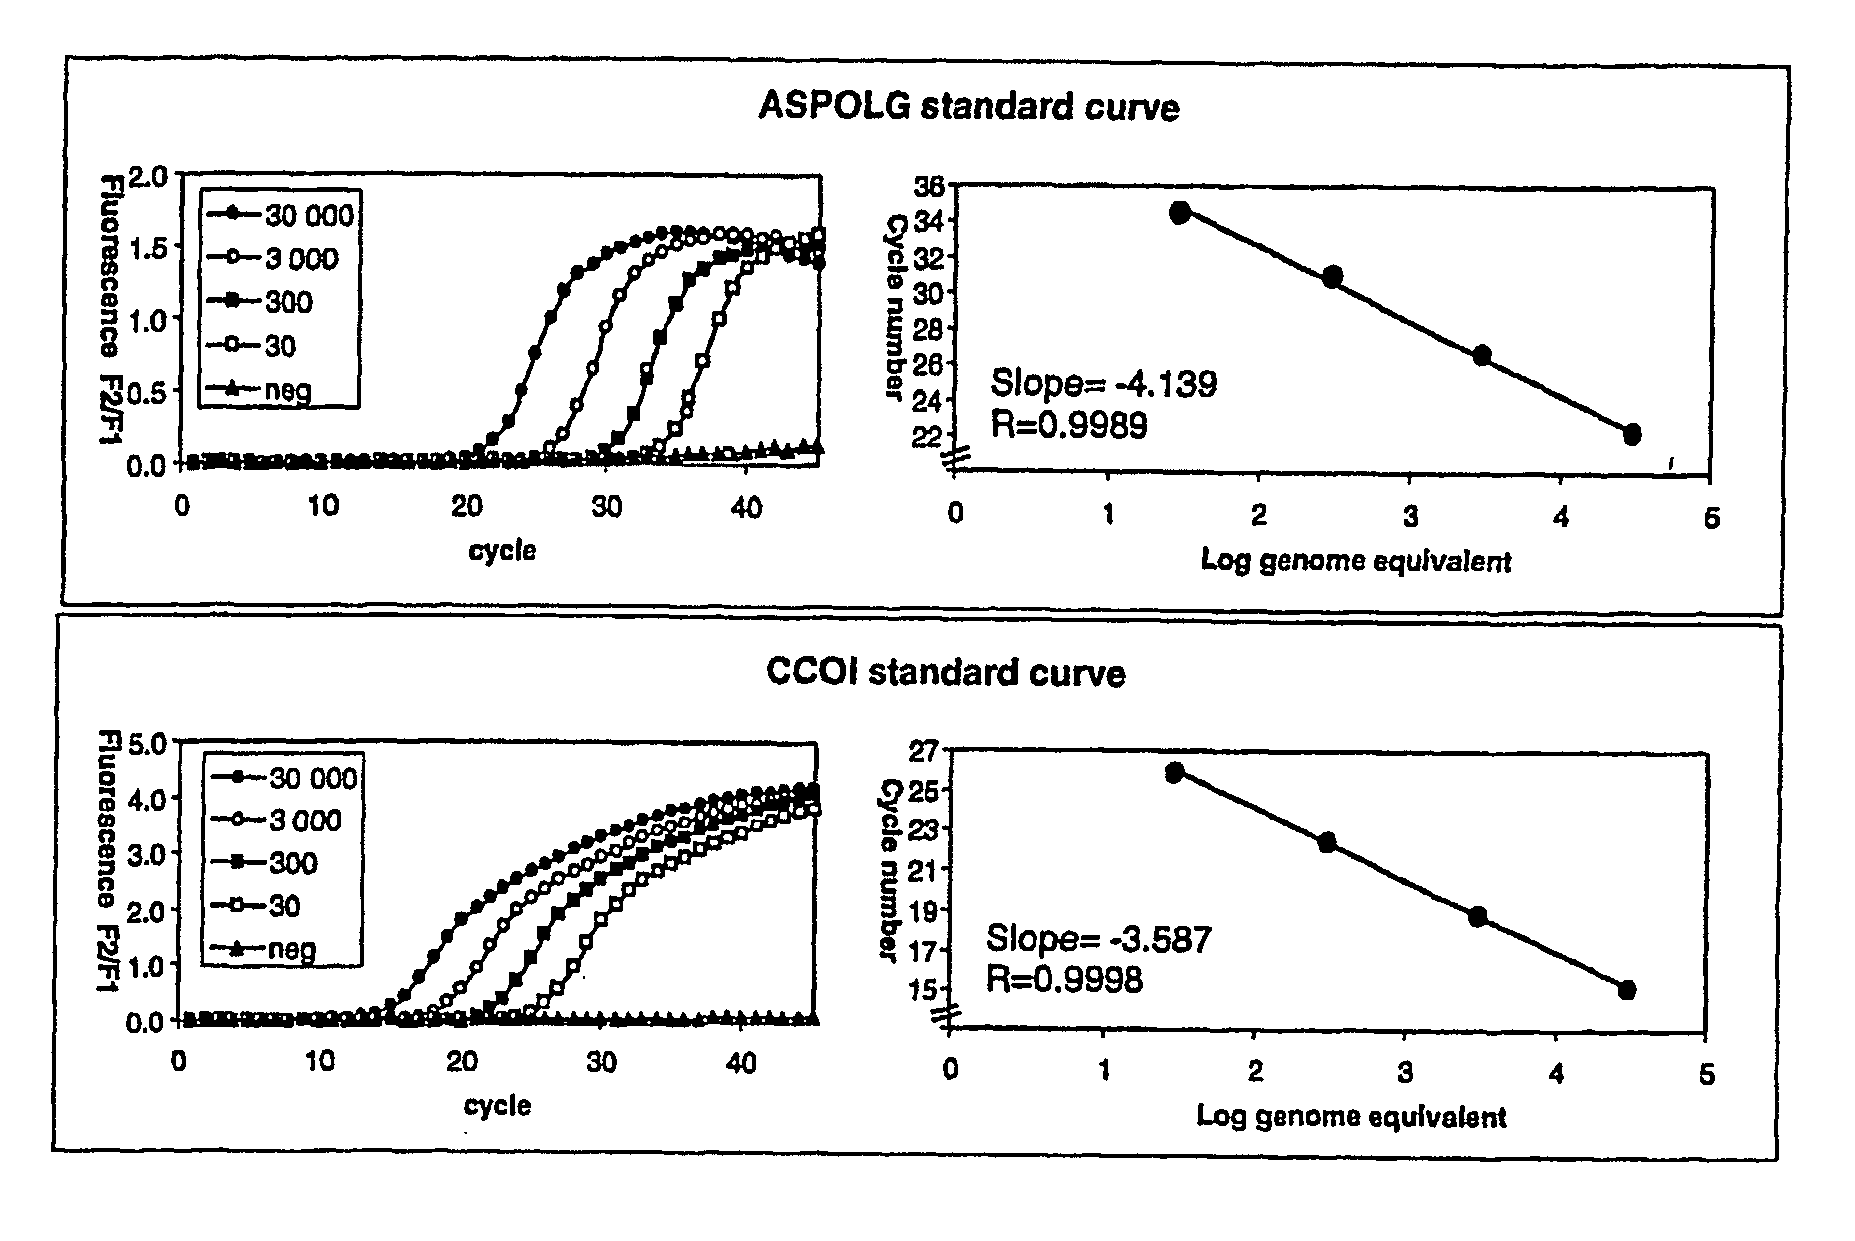 Diagnosis of sepsis using mitochondrial nucleic acid assays